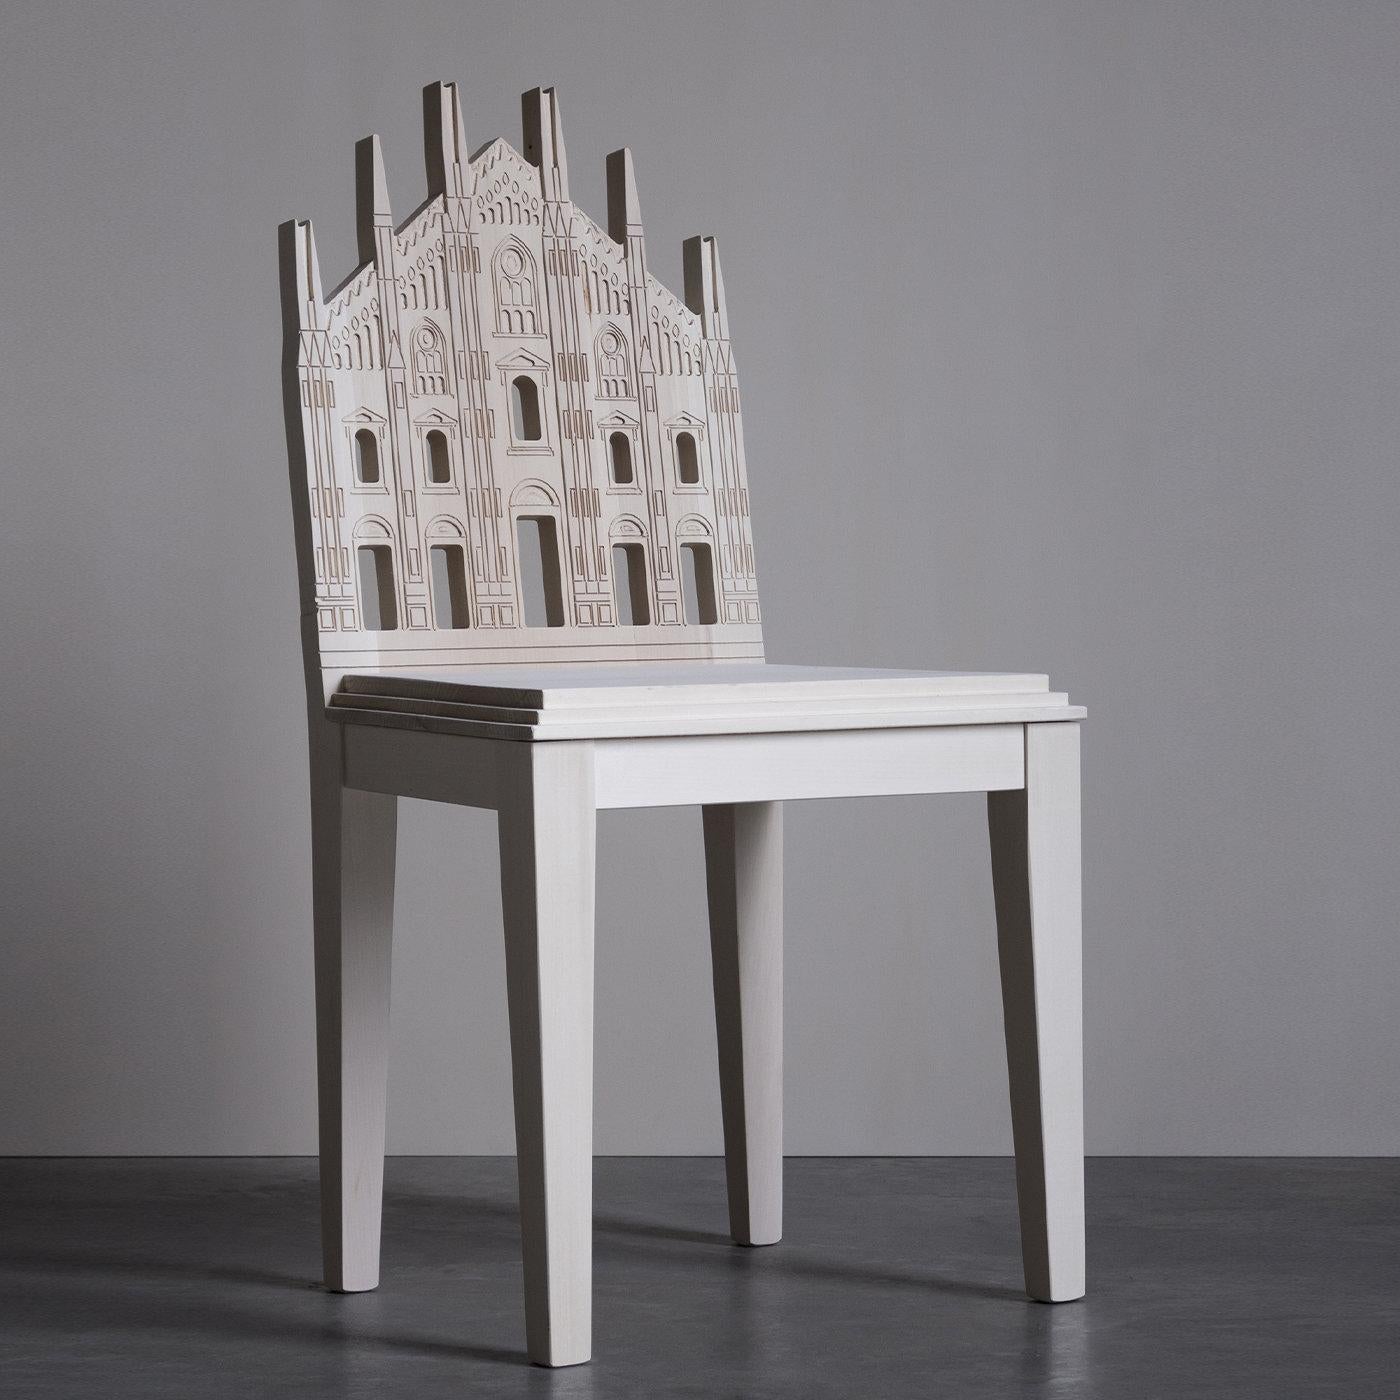 The refined and charming details of the majestic Duomo of Milan are meticulously reproduced in the stately backrest of this solid wood chair, a spectacular creation by young artist, artisan, and designer Cosimo De Vita. Part of the Cityng Collection